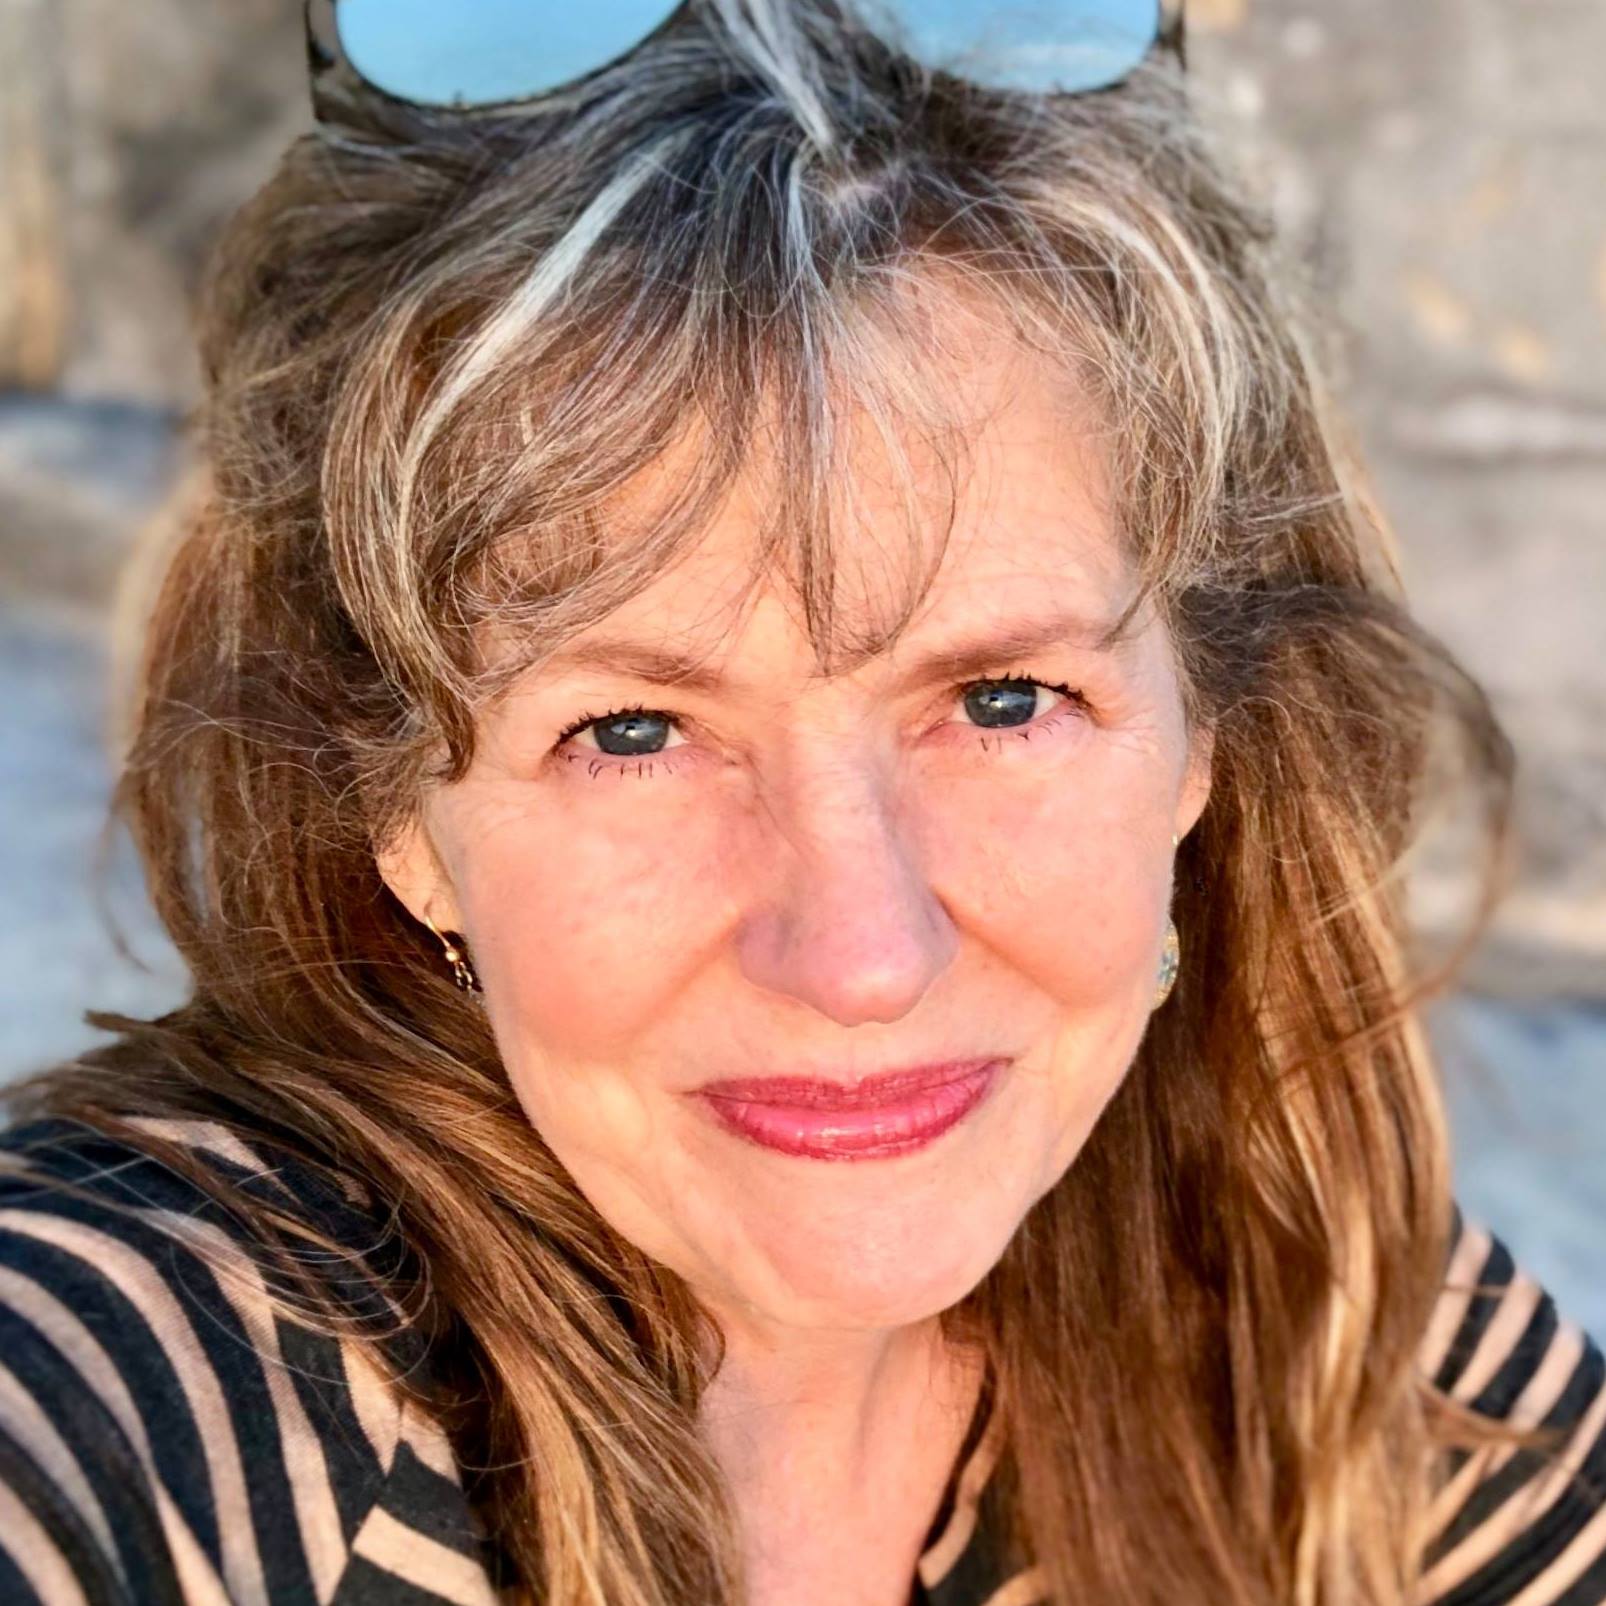 A picture of Allison. She is a white woman with brown graying hair and dark pink lipstick. She is wearing a black and white striped shirt and looking up into the camera.